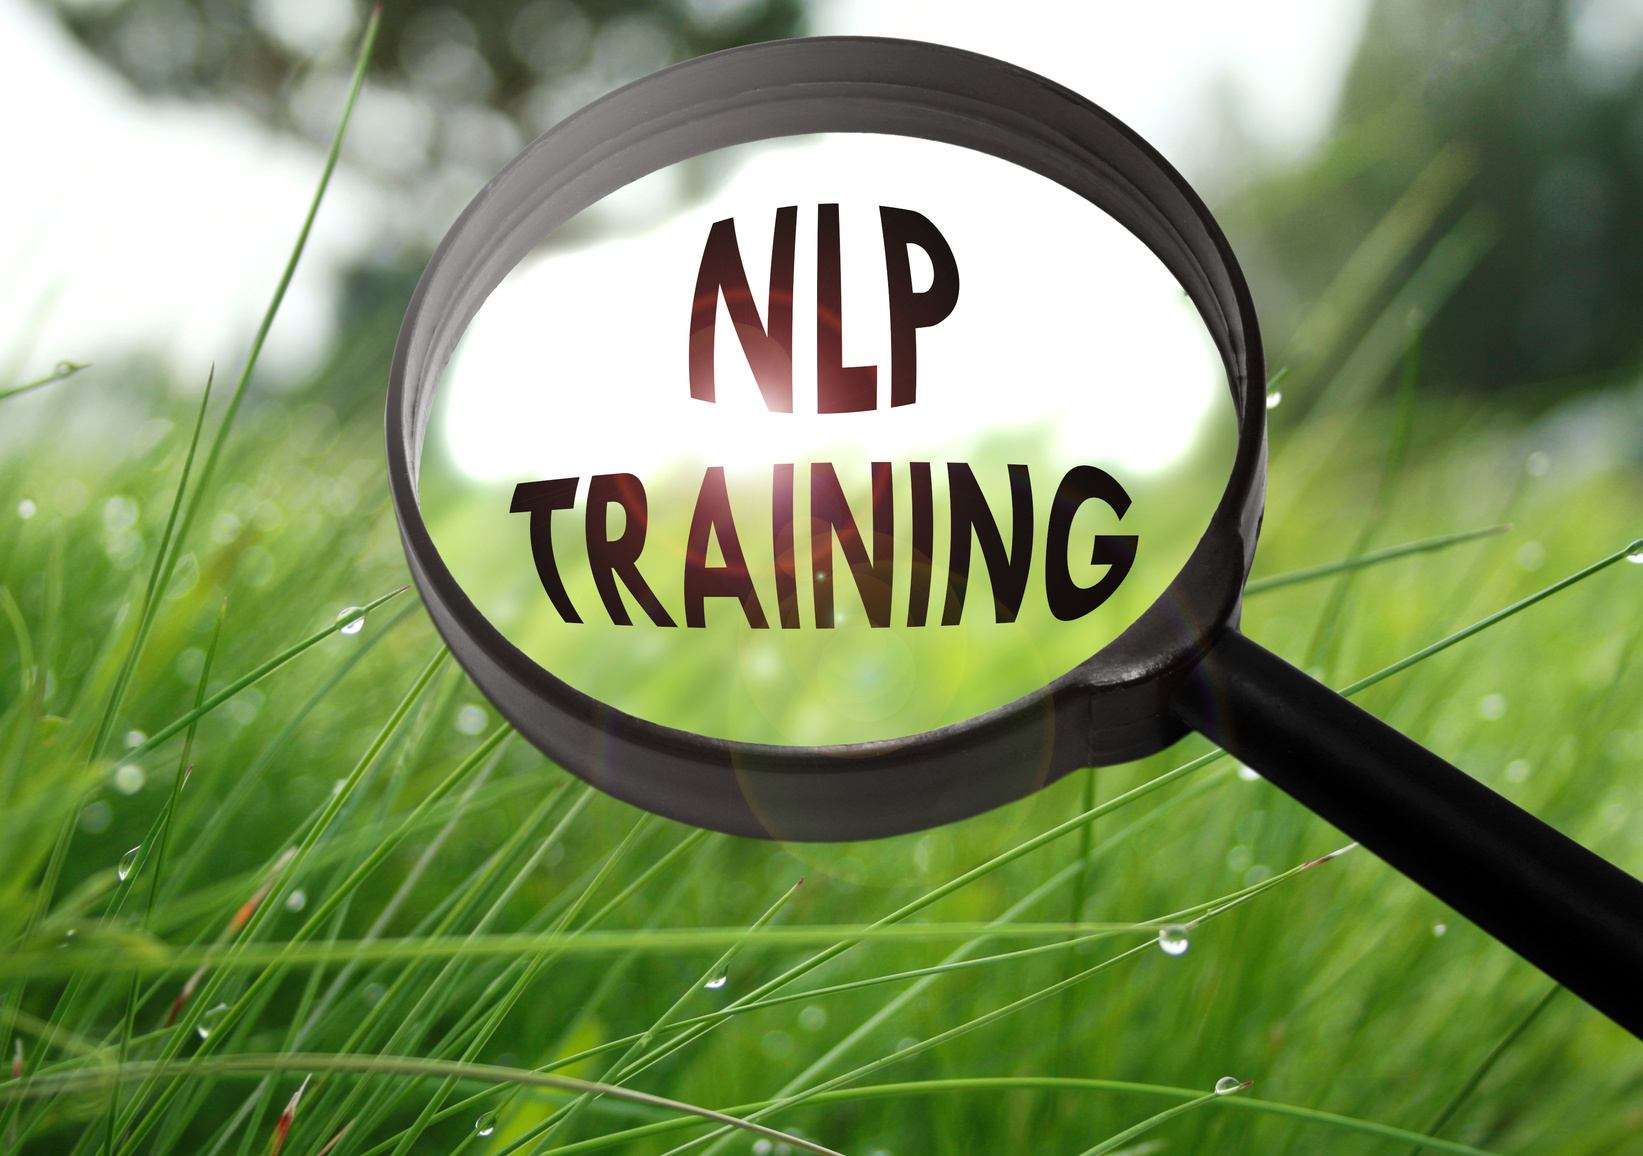 NLP Training Magnifying Glass